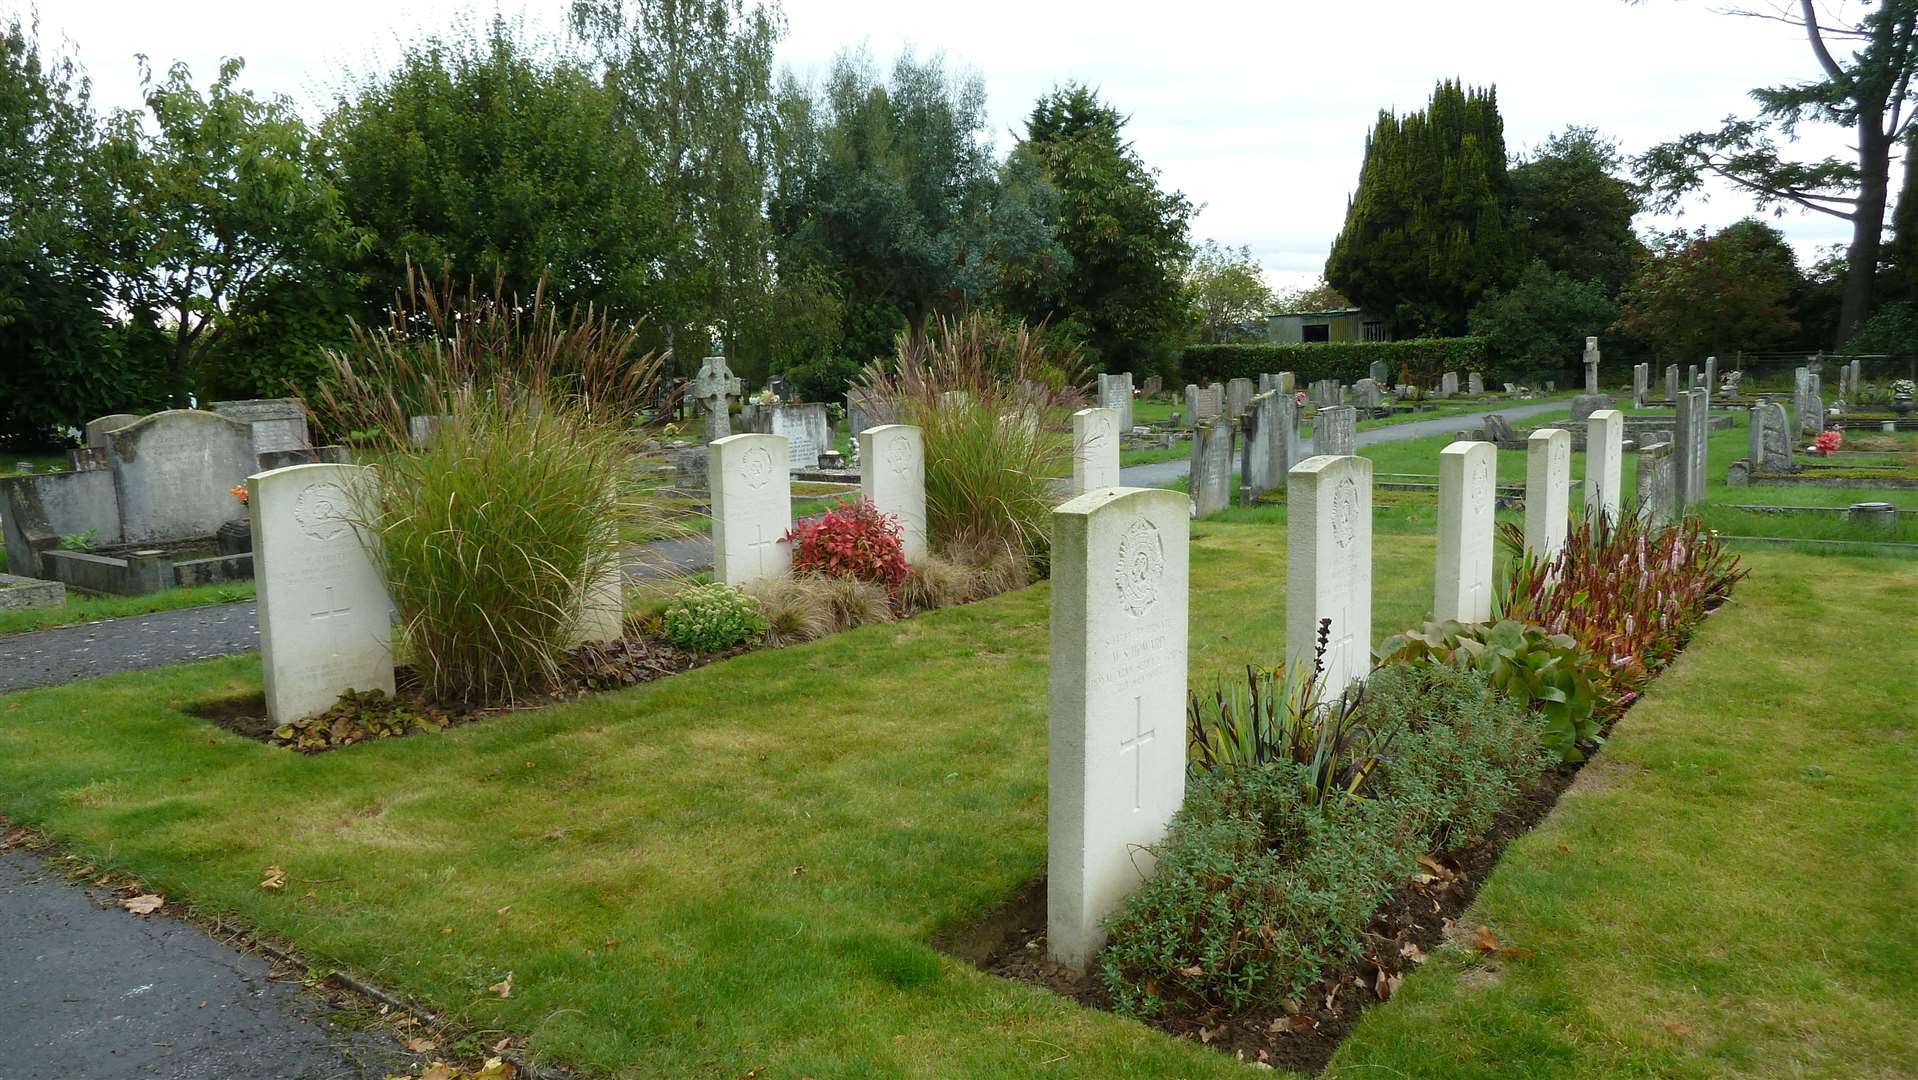 The graves in Marden Cemetery (10440632)